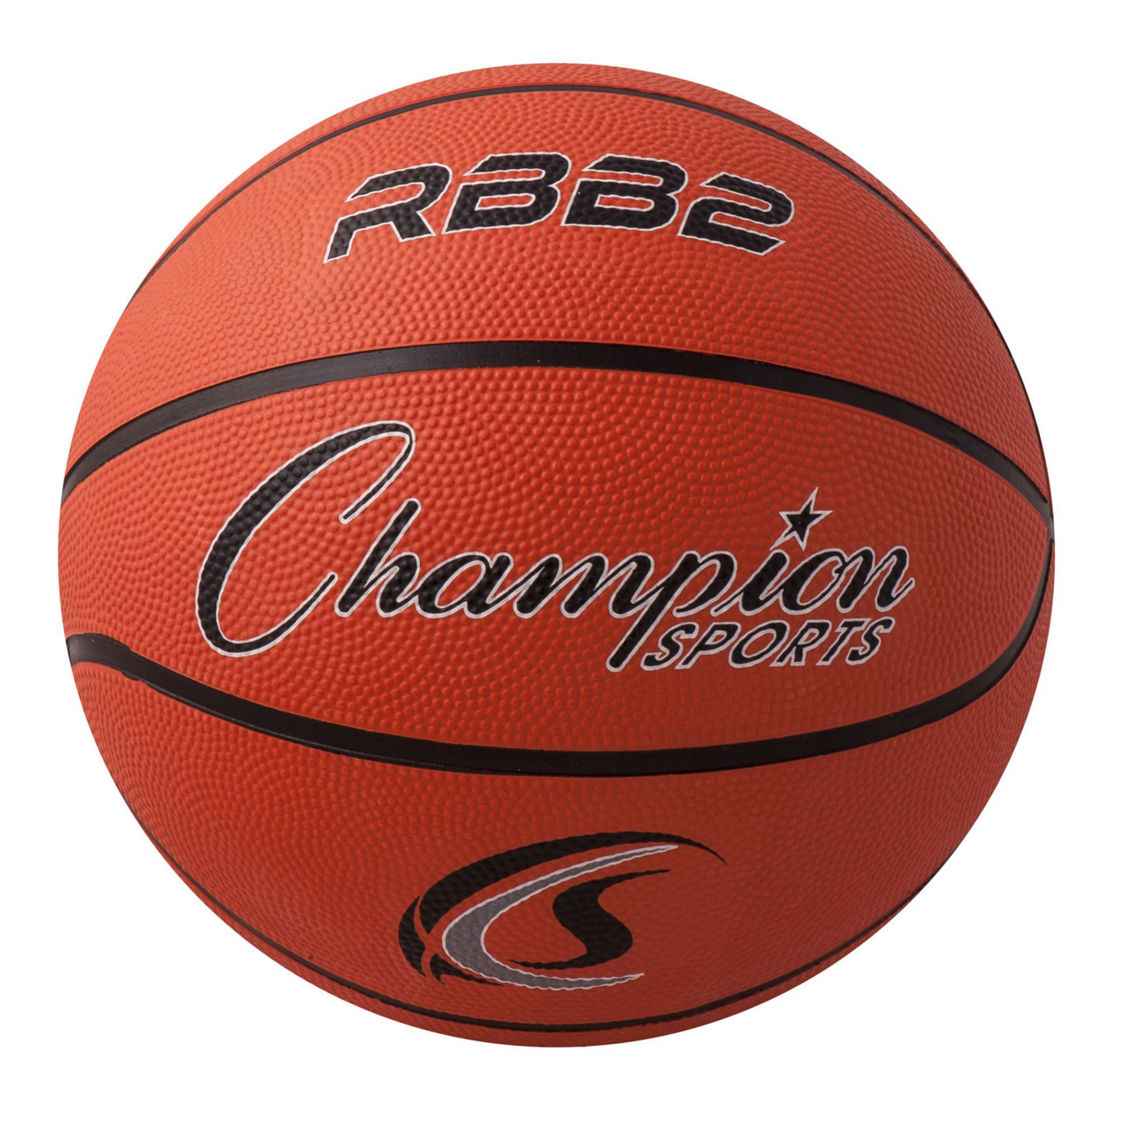 Champion Sports Junior Rubber Basketball, Orange, Pack of 3 - Image 2 of 2